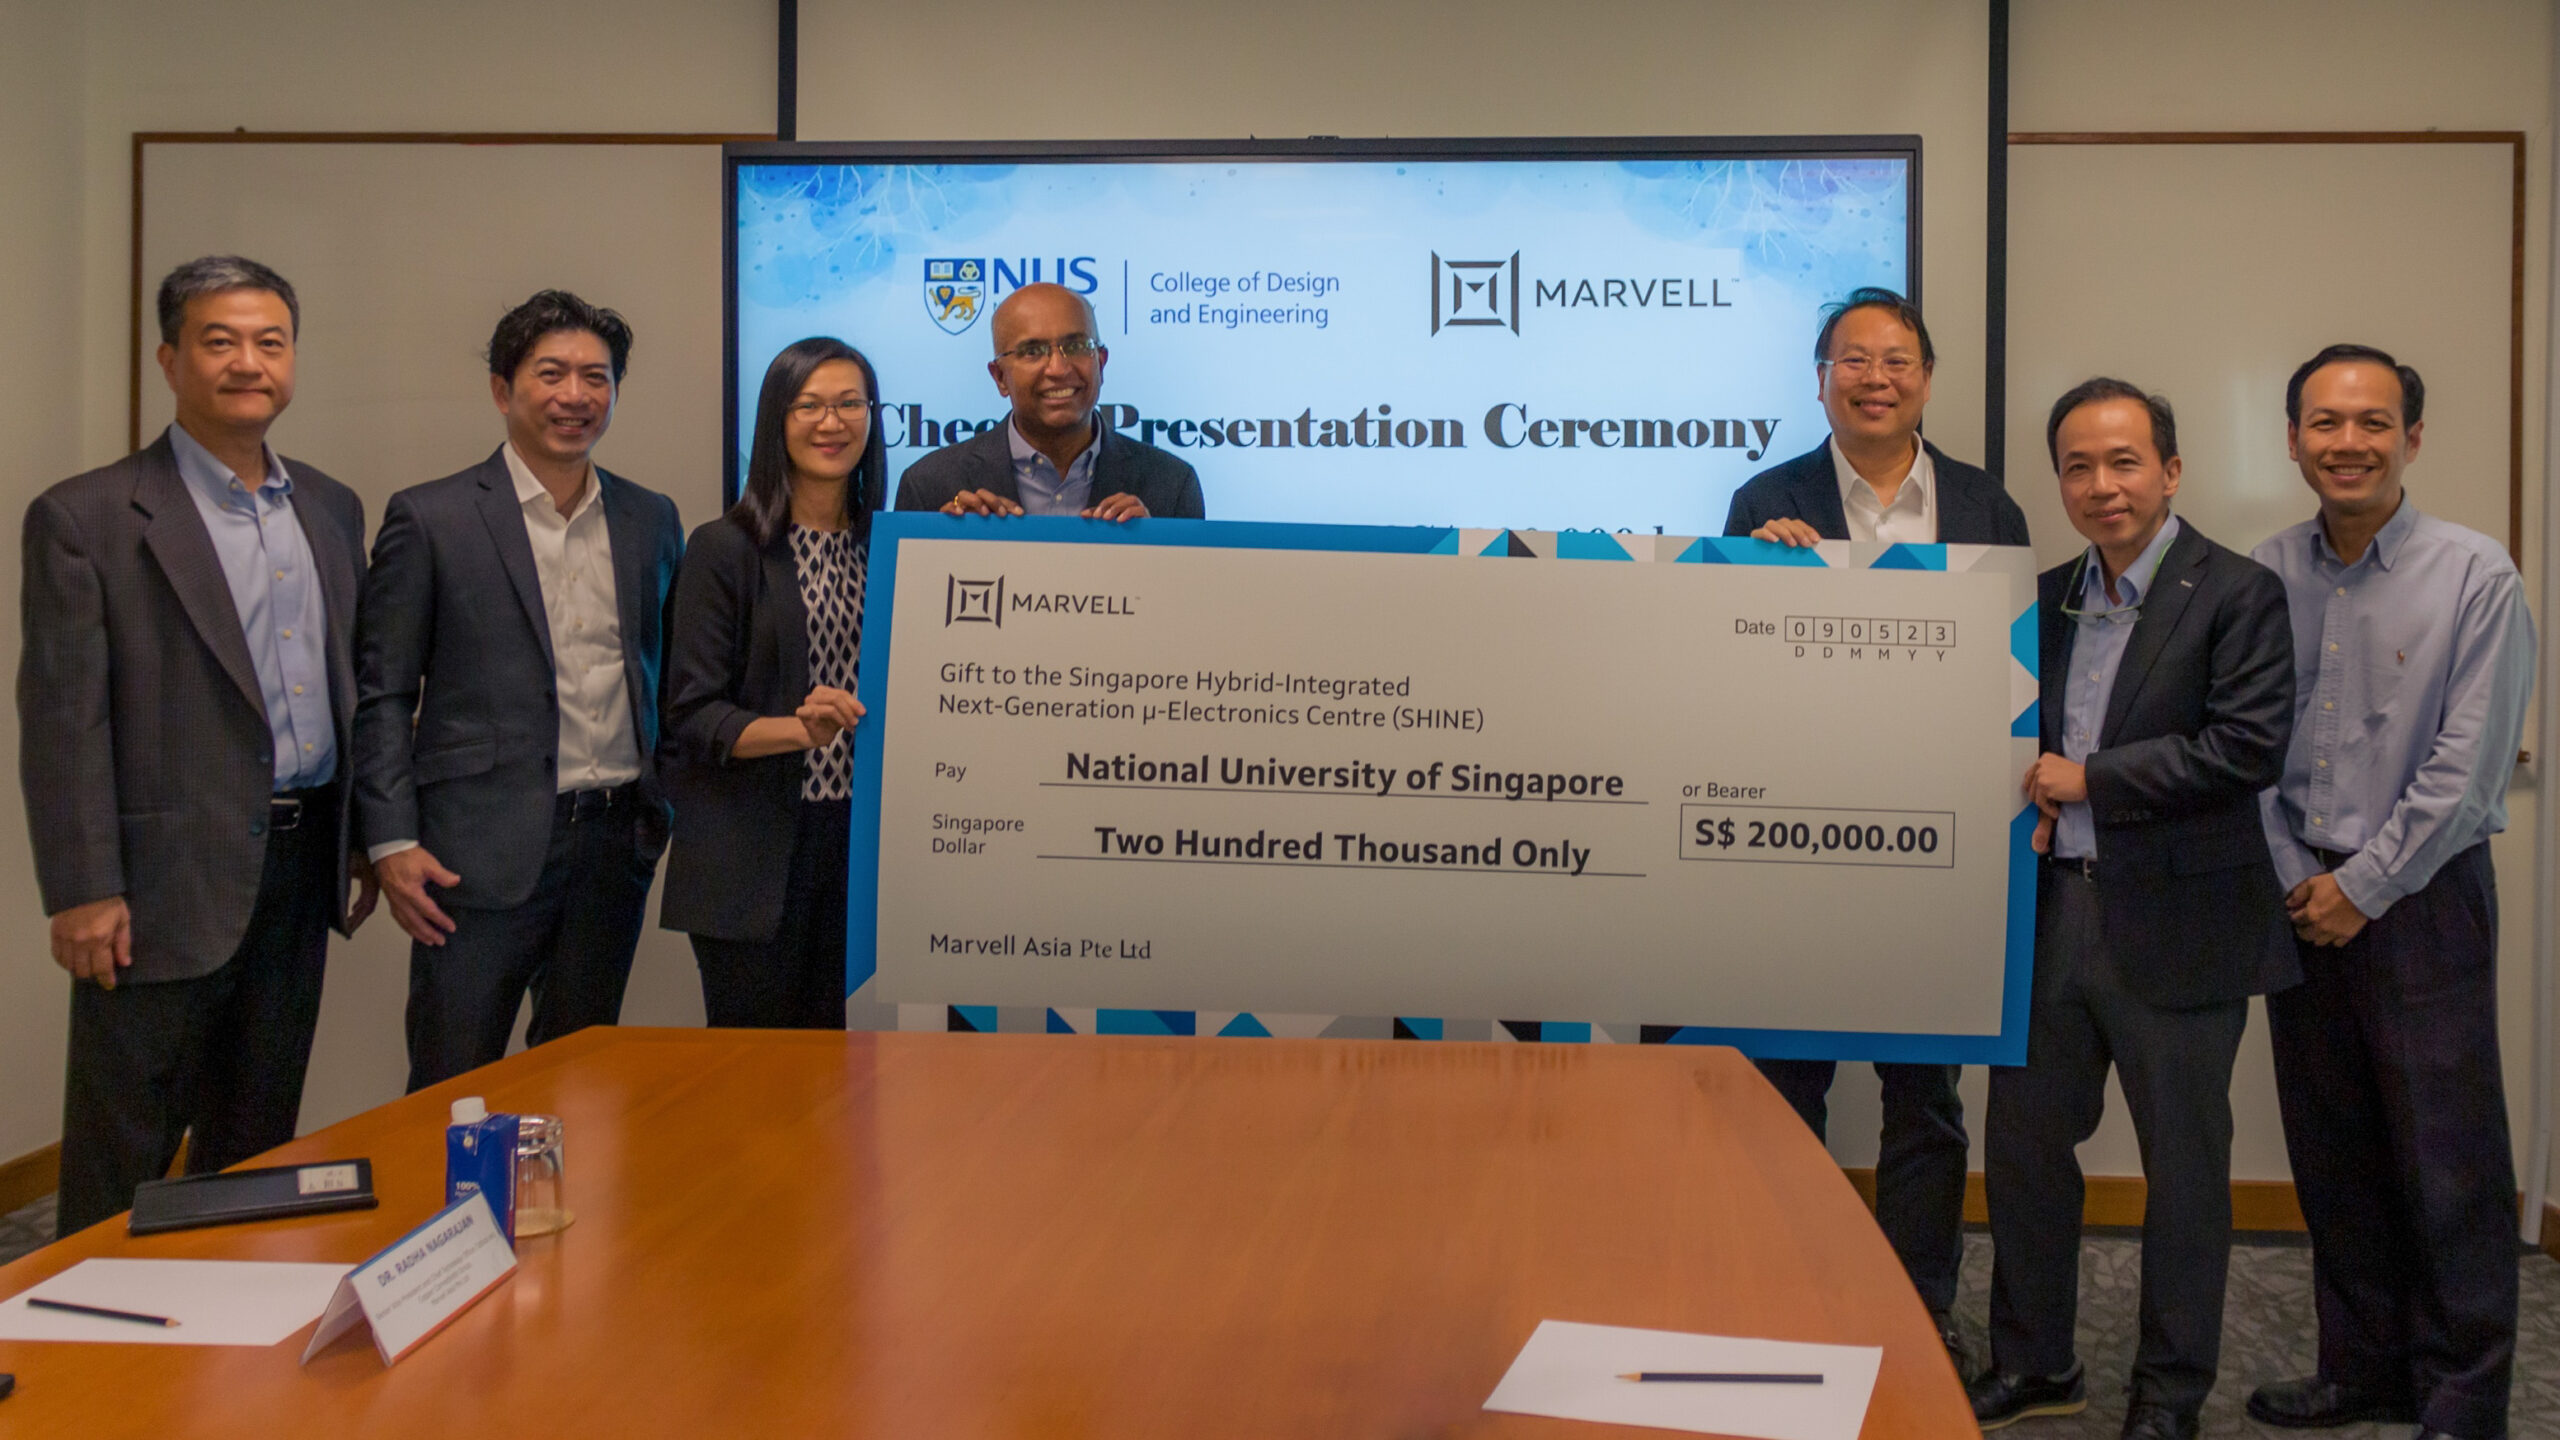 Representatives from Marvell Asia and CDE at the cheque presentation marking the donation.